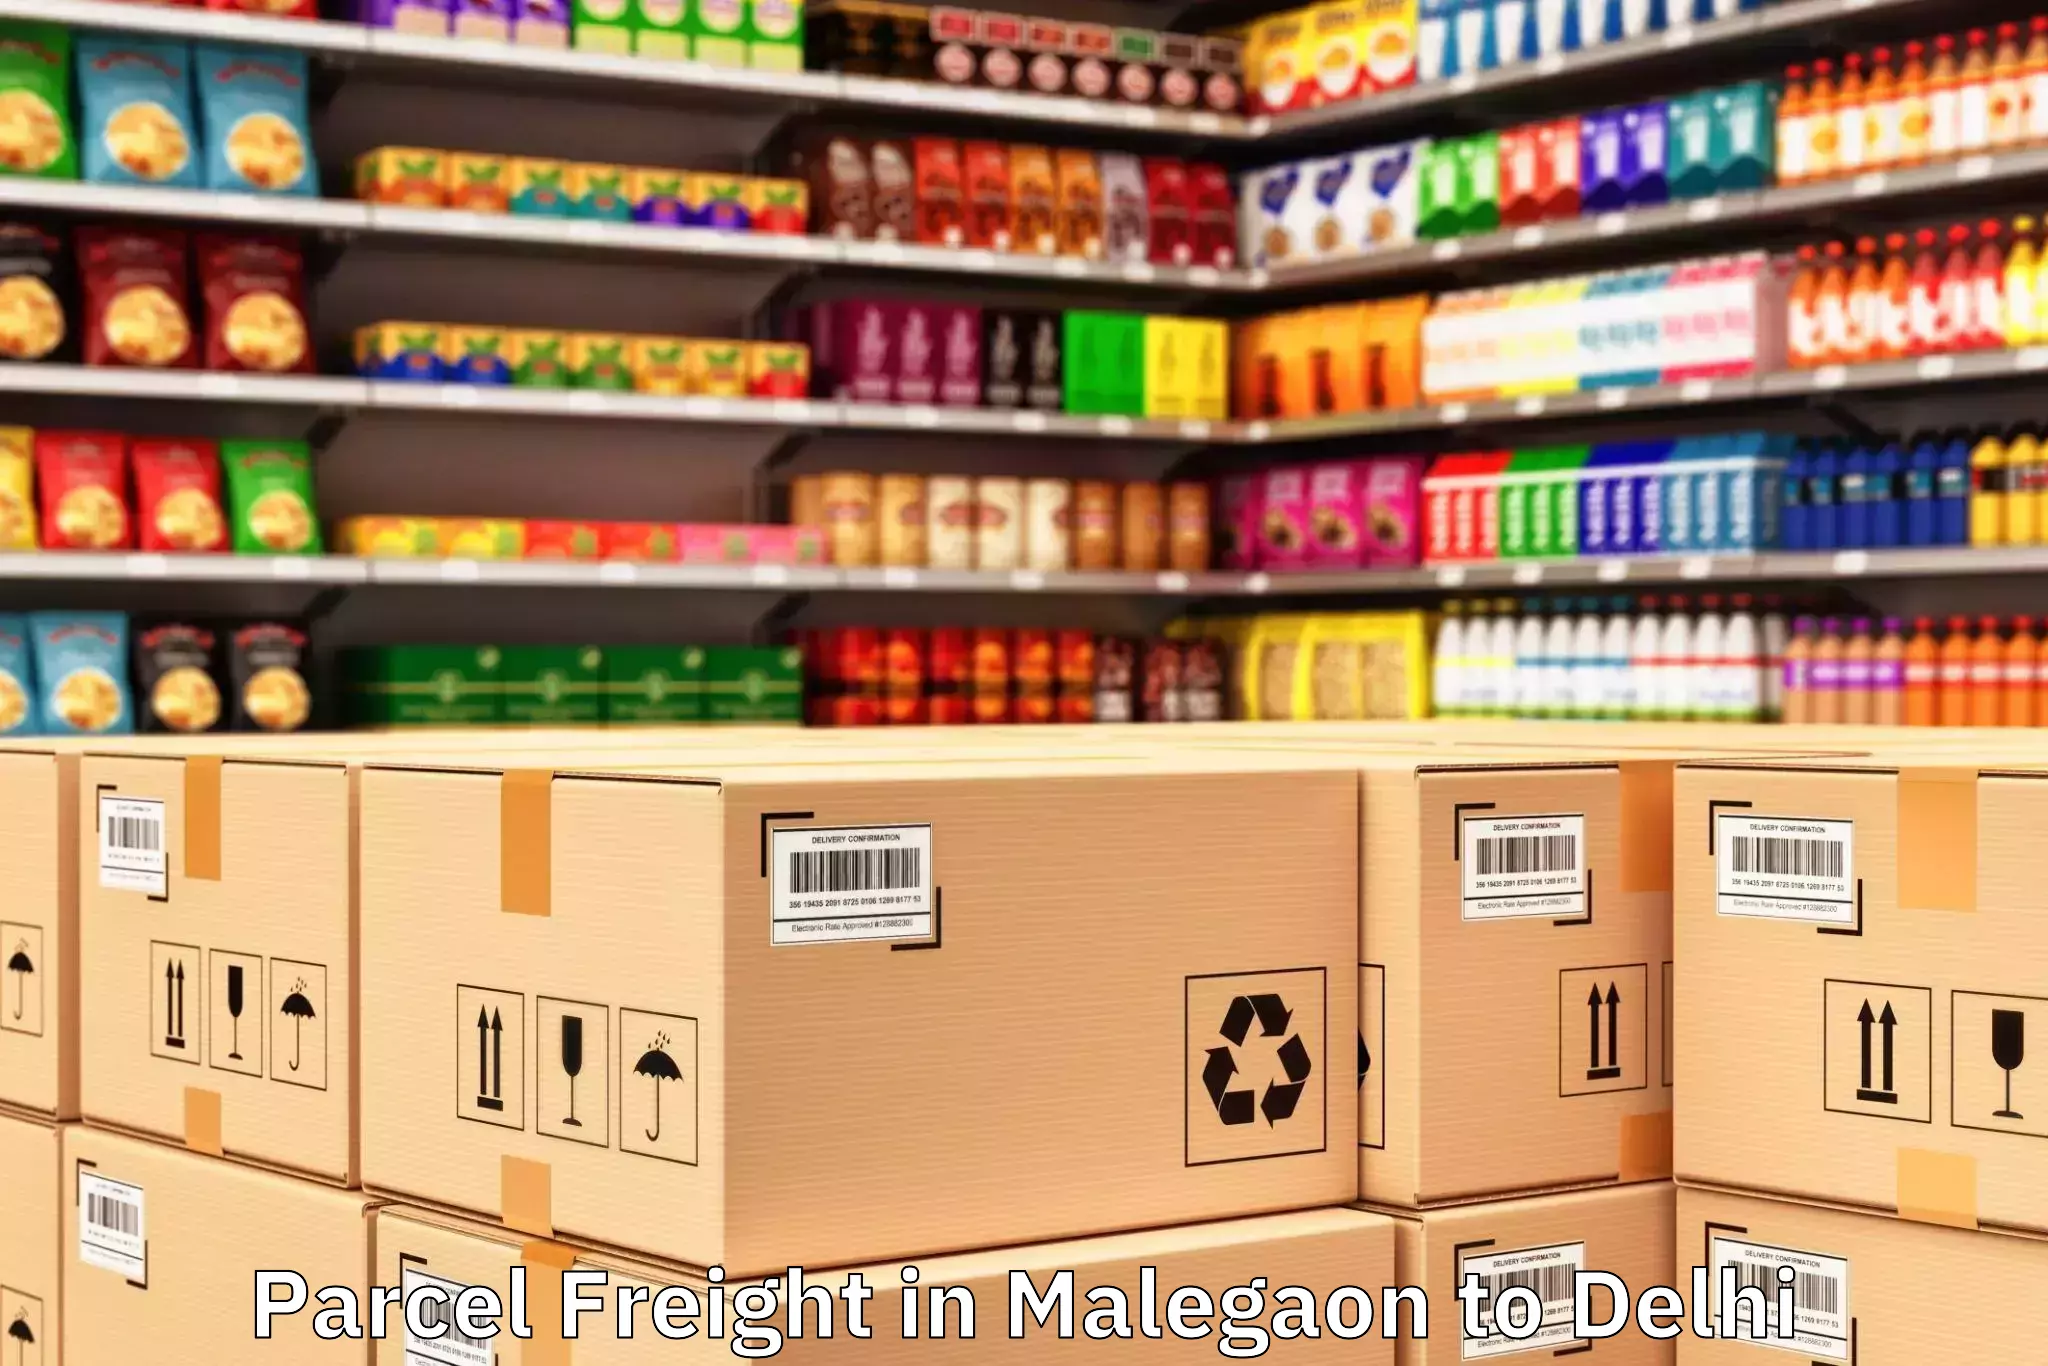 Malegaon to Functional Industrial Estate For Electronics Parcel Freight